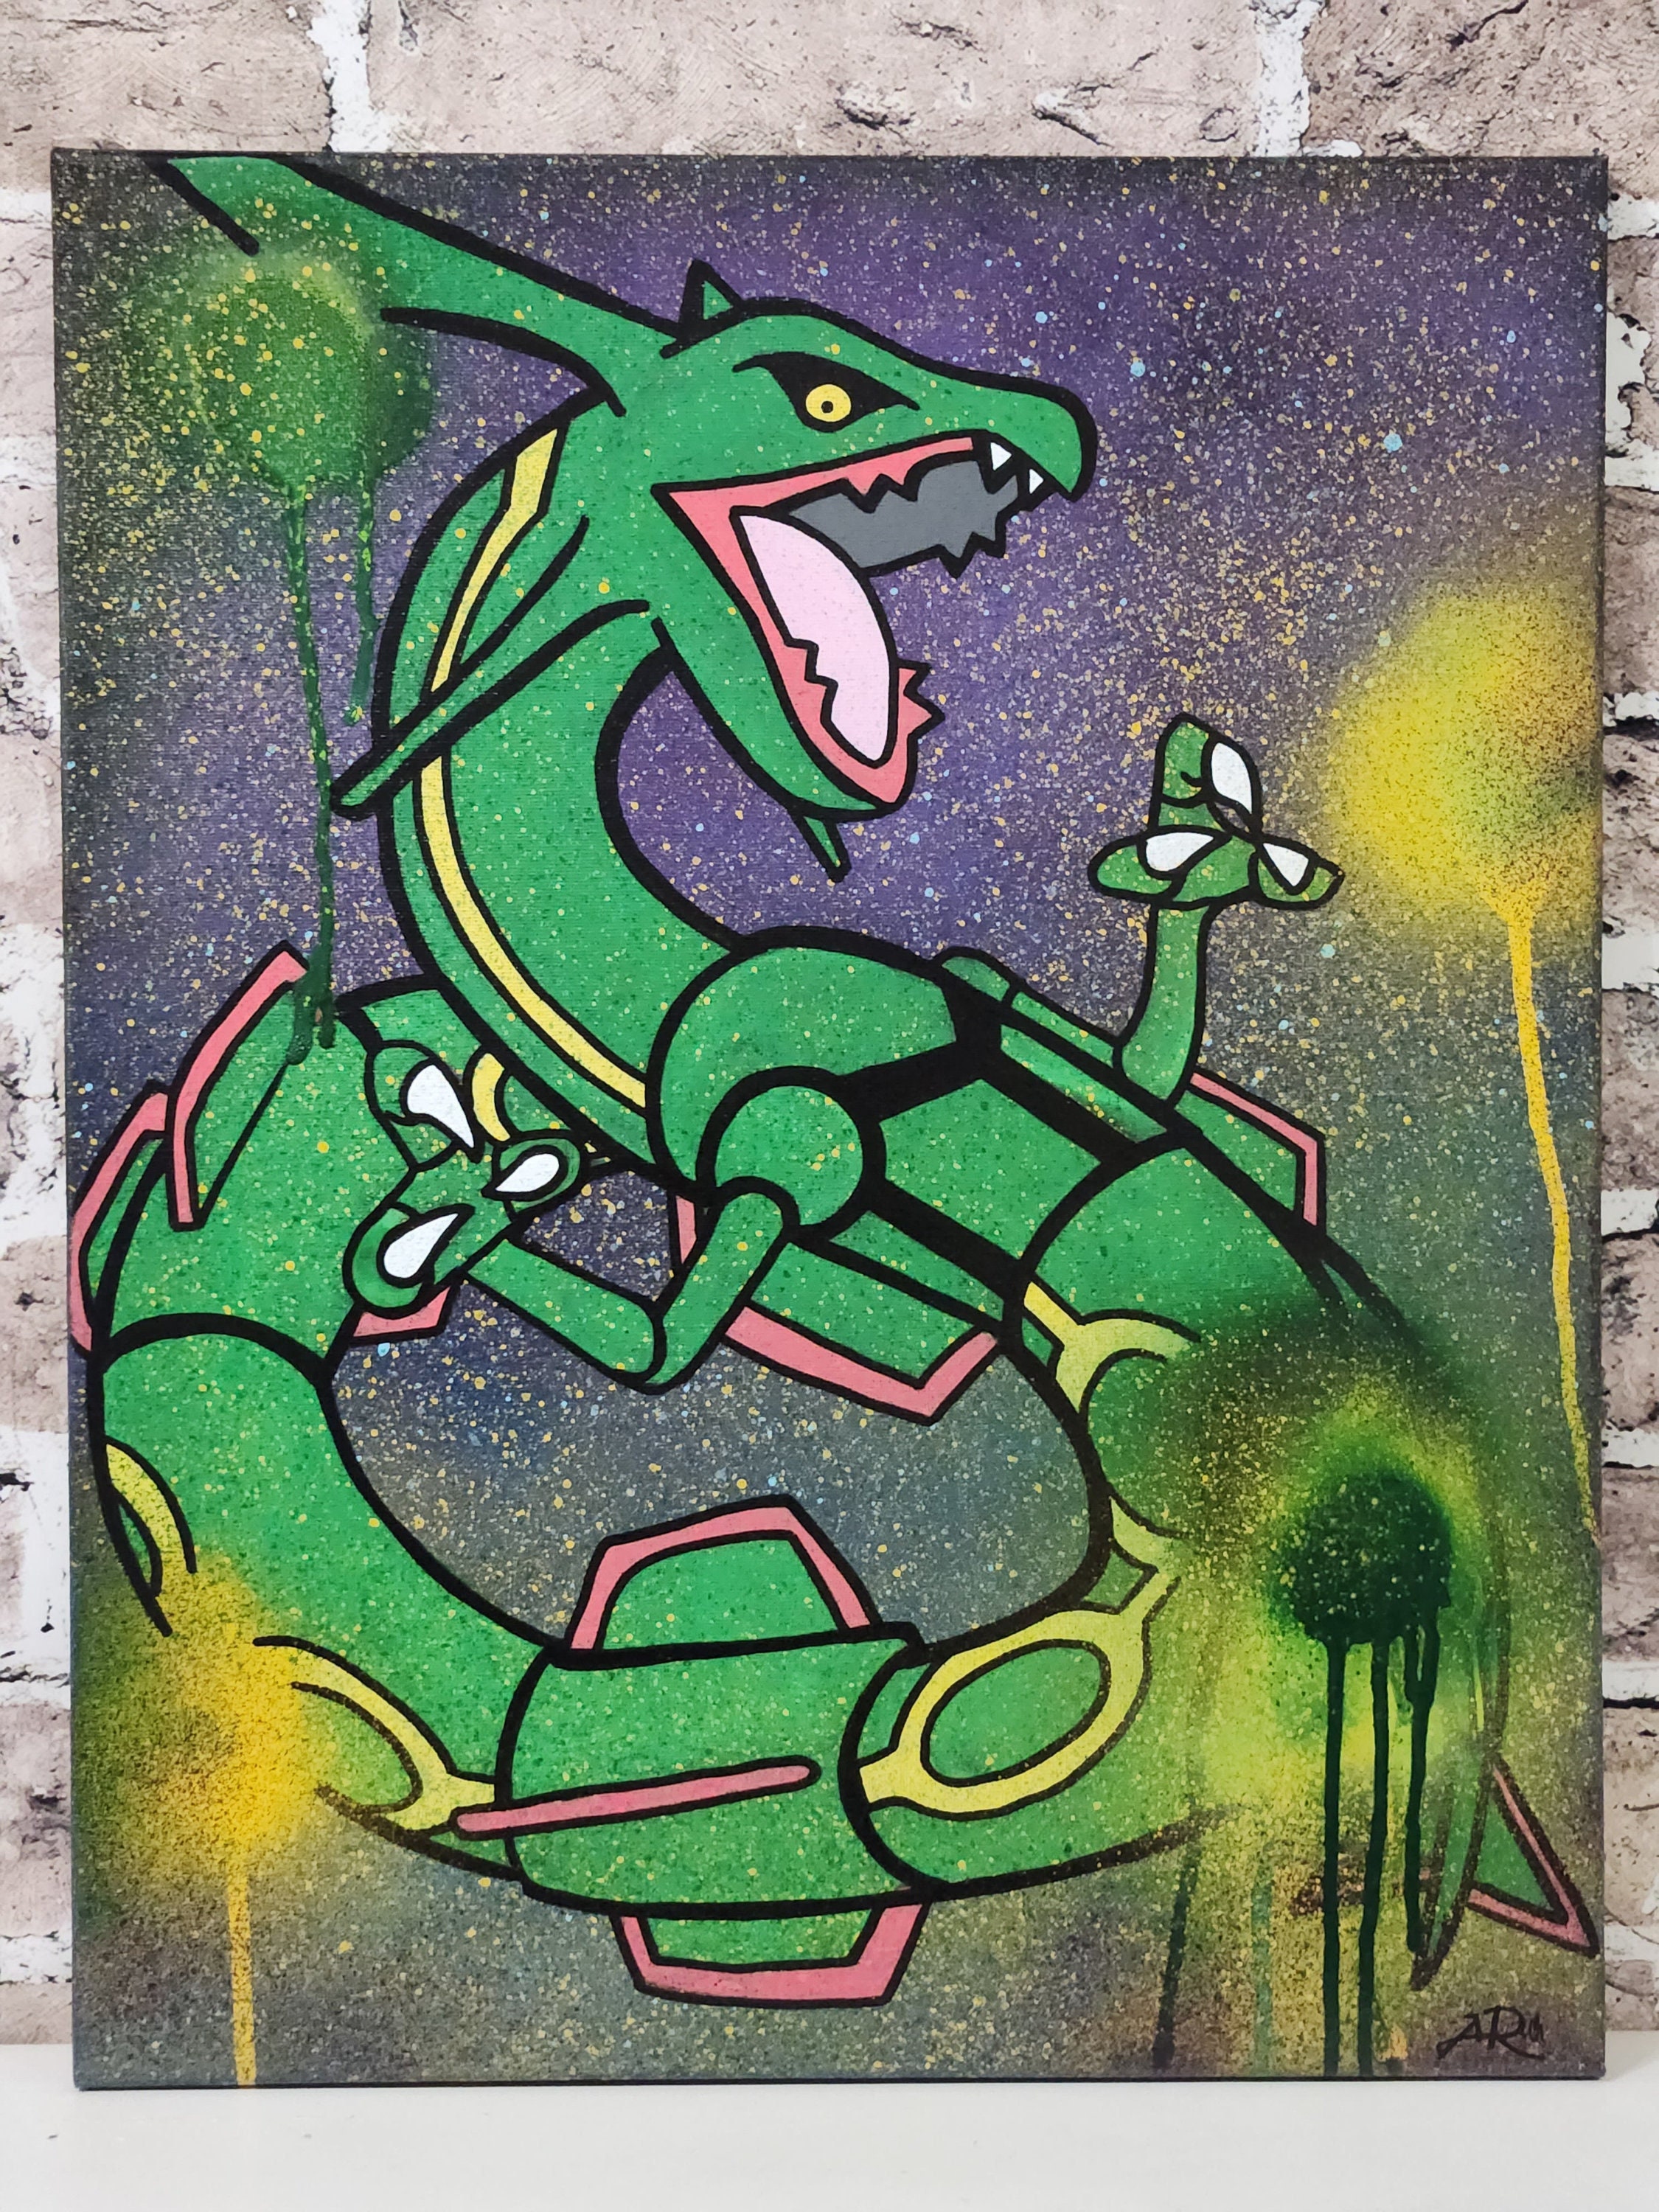 WERTQ Shiny Rayquaza Canvas Art Poster and Wall Art Picture Print